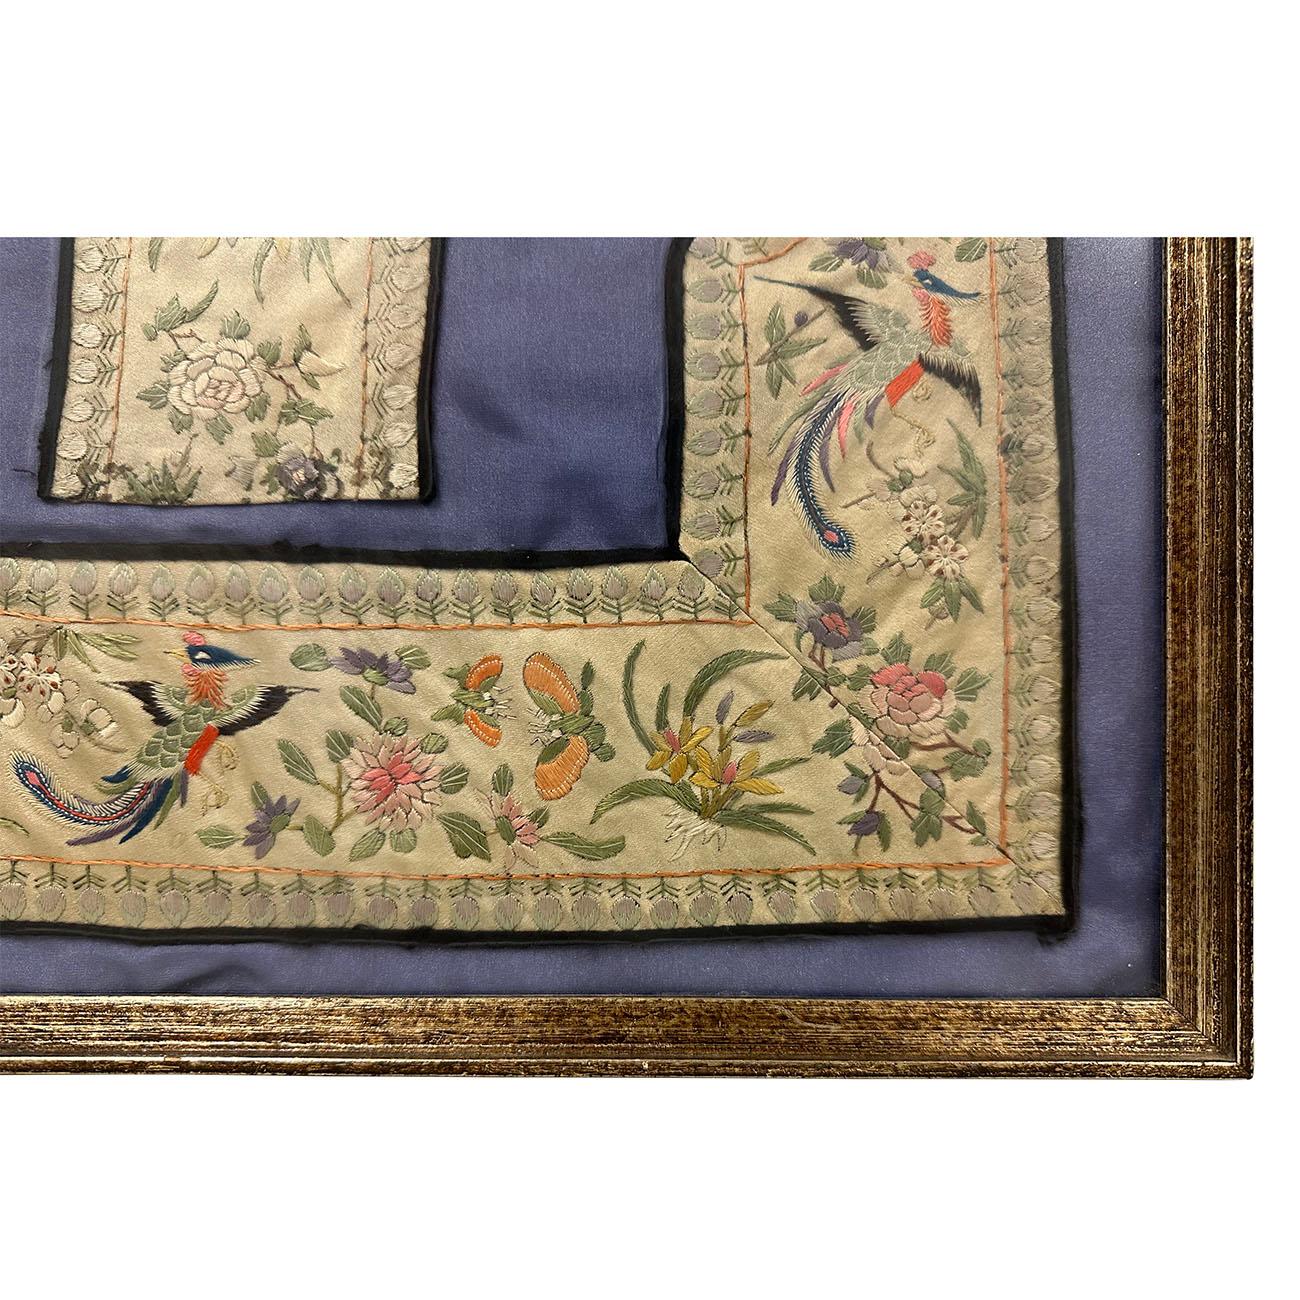 19th Century Antique Chinese Framed Groups of Textile Embroidery Pieces For Sale 7